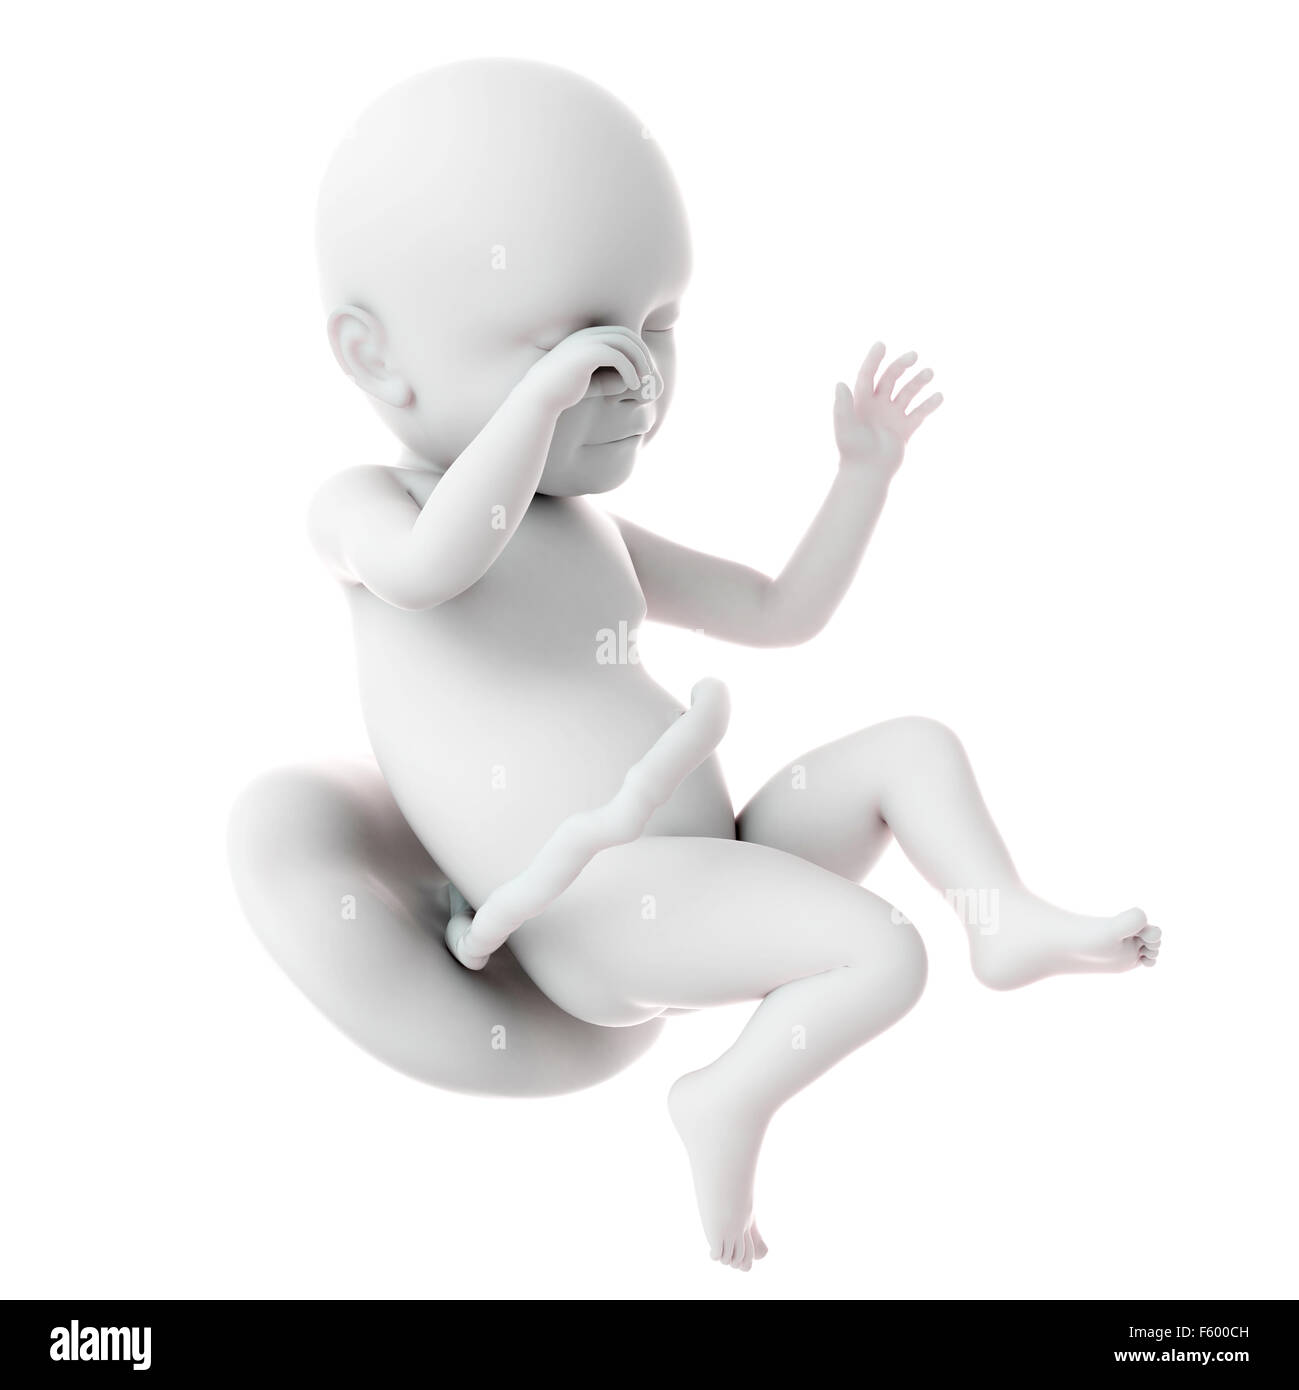 medically accurate illustration of a fetus week 39 Stock Photo